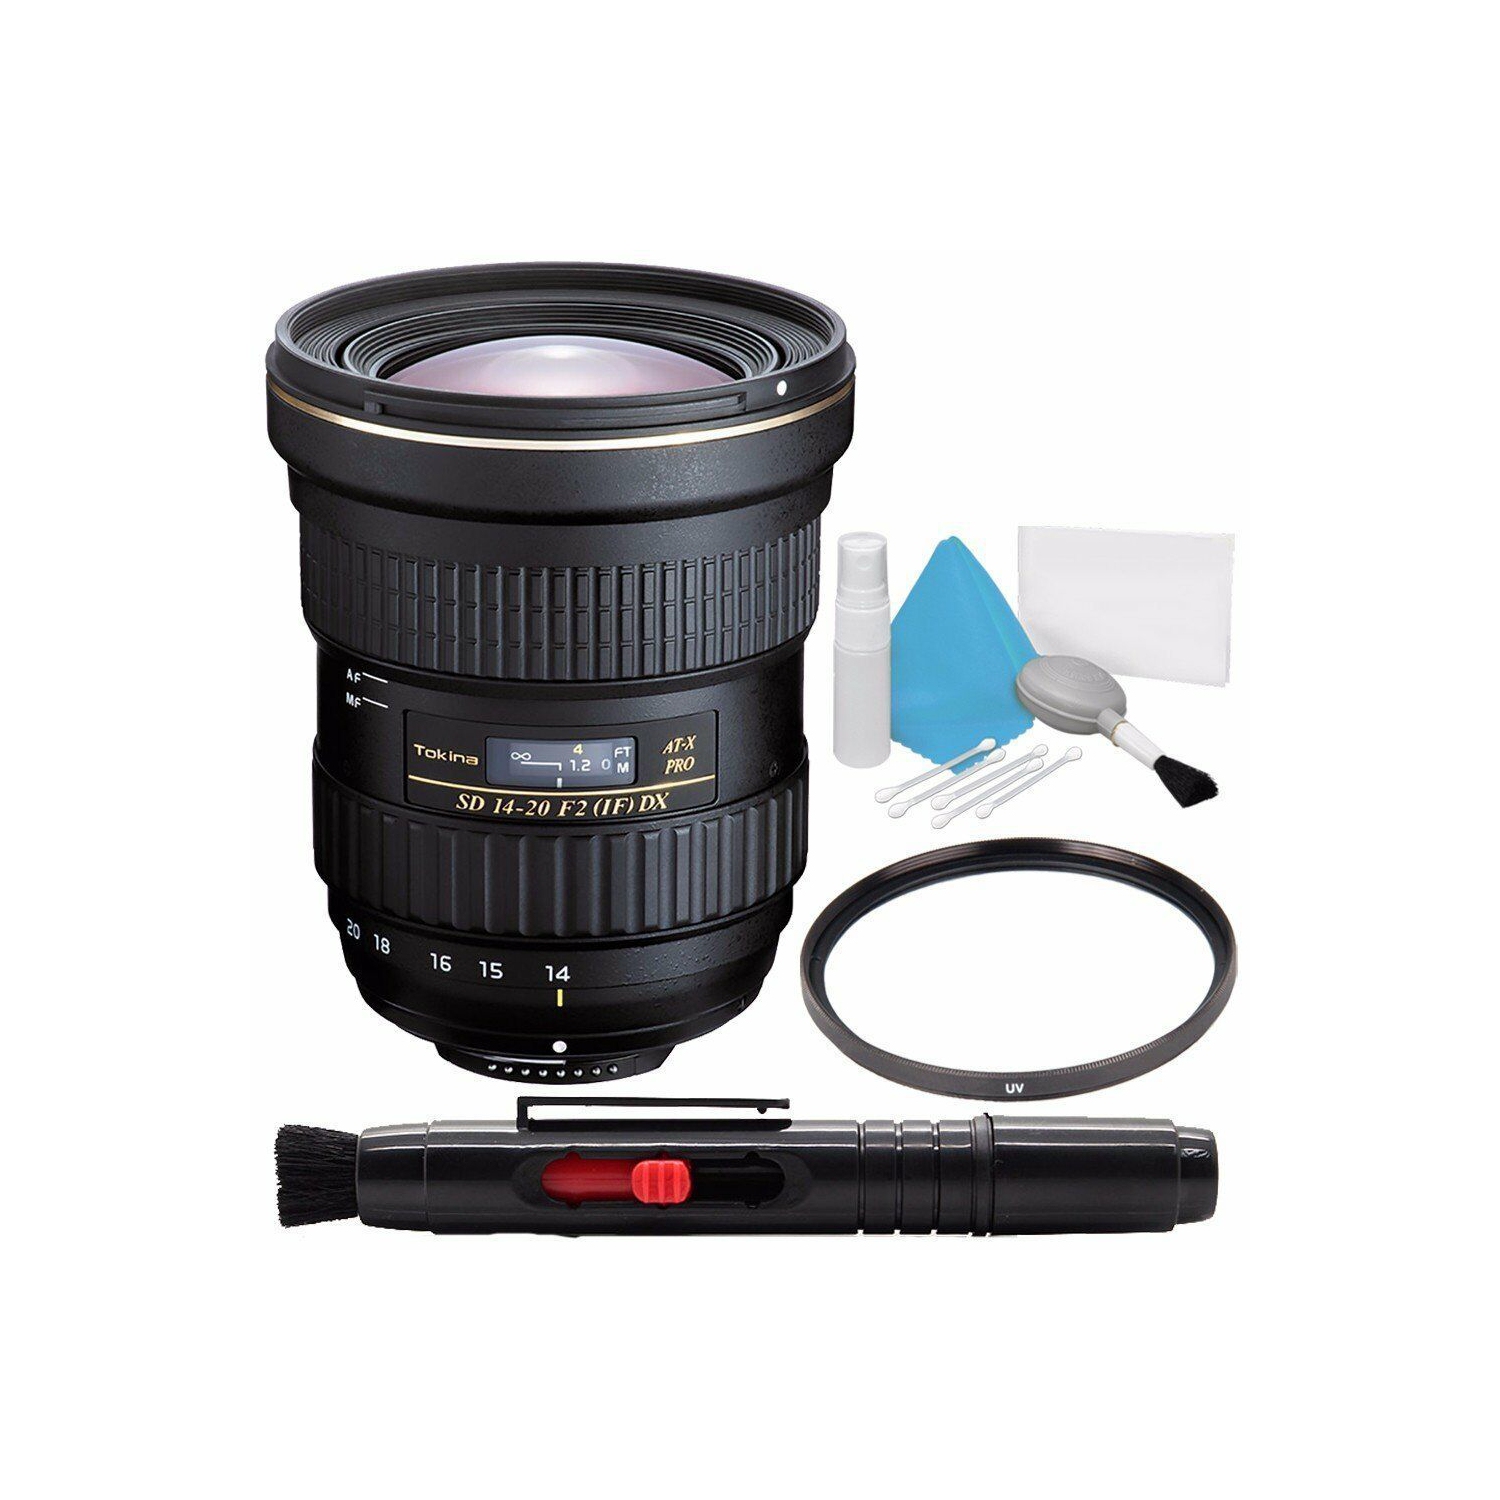 Tokina at-X 14-20mm f/2 PRO DX Lens for Canon EF (International Model) + Deluxe Cleaning Kit + 82mm UV Filter